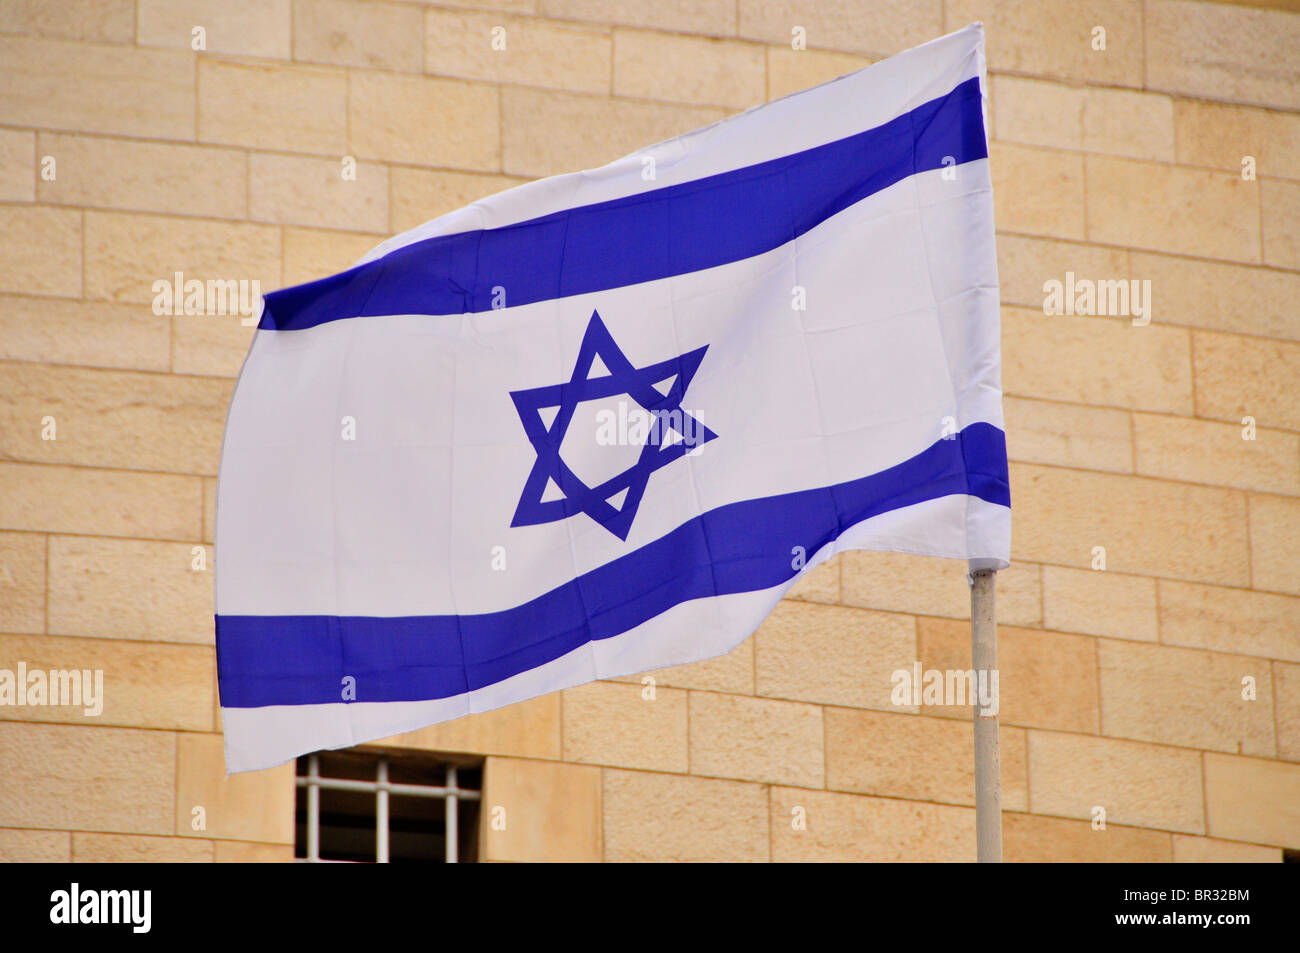 Israeli flag with the Star of David, Jerusalem, Israel, Middle East, the Orient Stock Photo